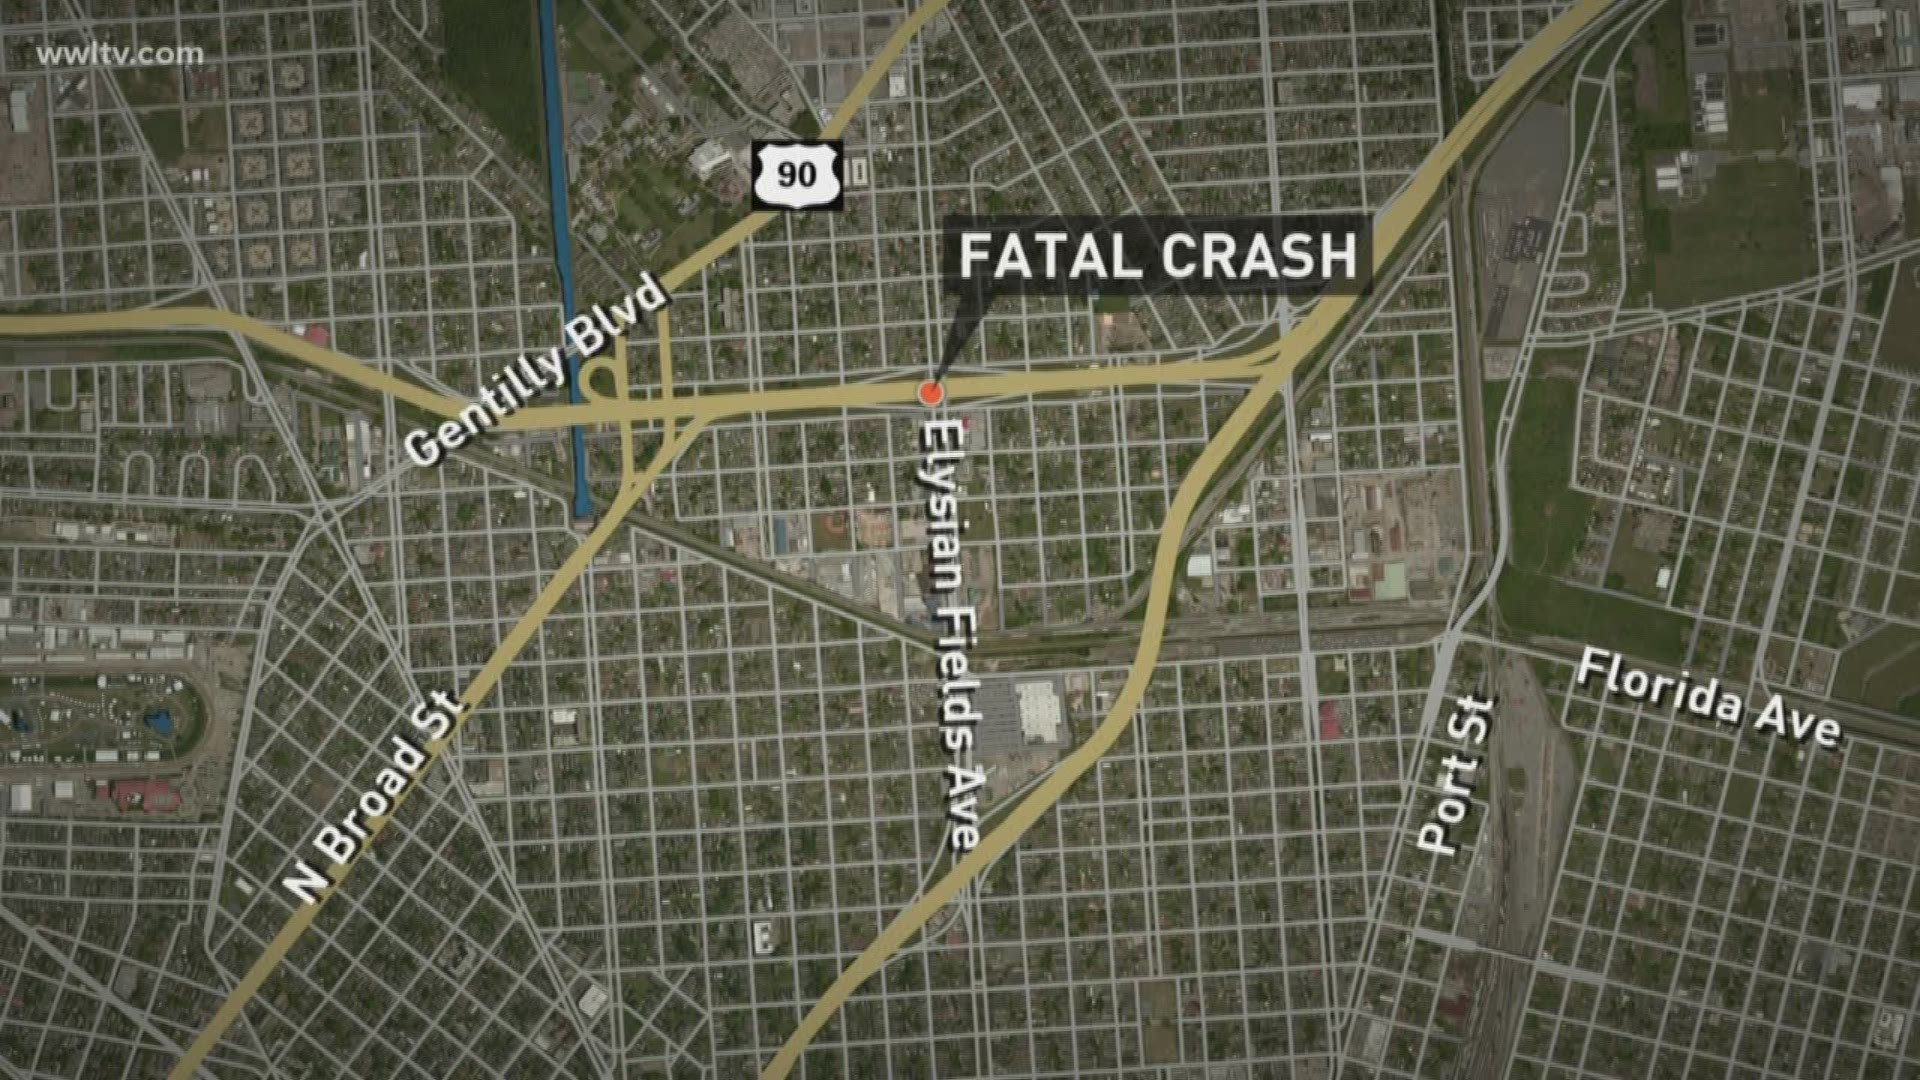 Police say a man was struck and killed by a passing car near the intersection of I-610 West and Elysian Fields Avenue Saturday morning.